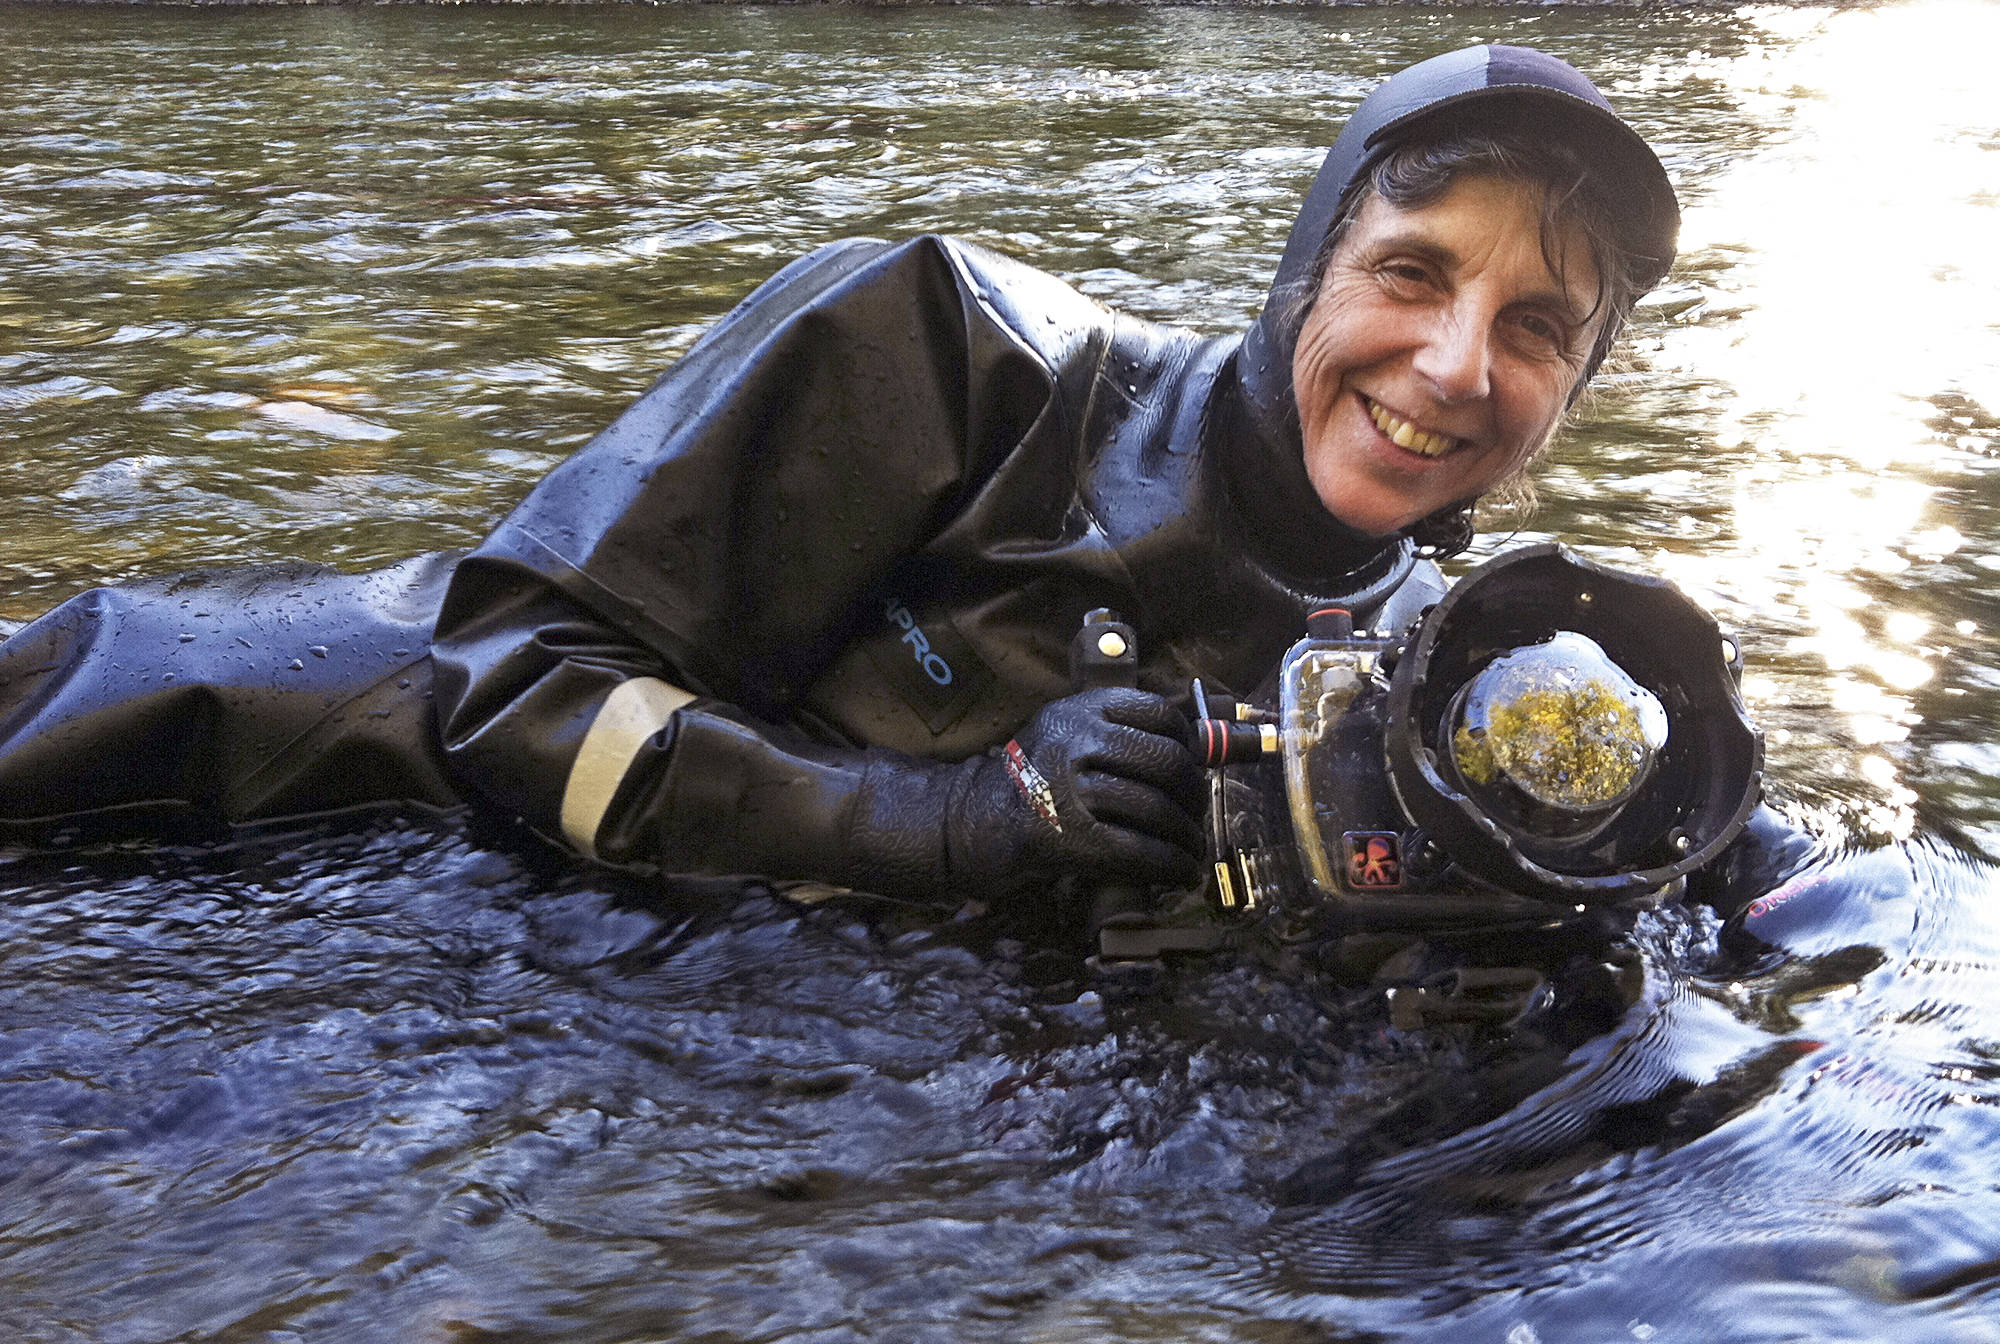 Uninterrupted director Nettie Wild has spent many hours over the past seven years filming underwater in B.C. rivers.- Image credit: Michael J.P. Hall photo.